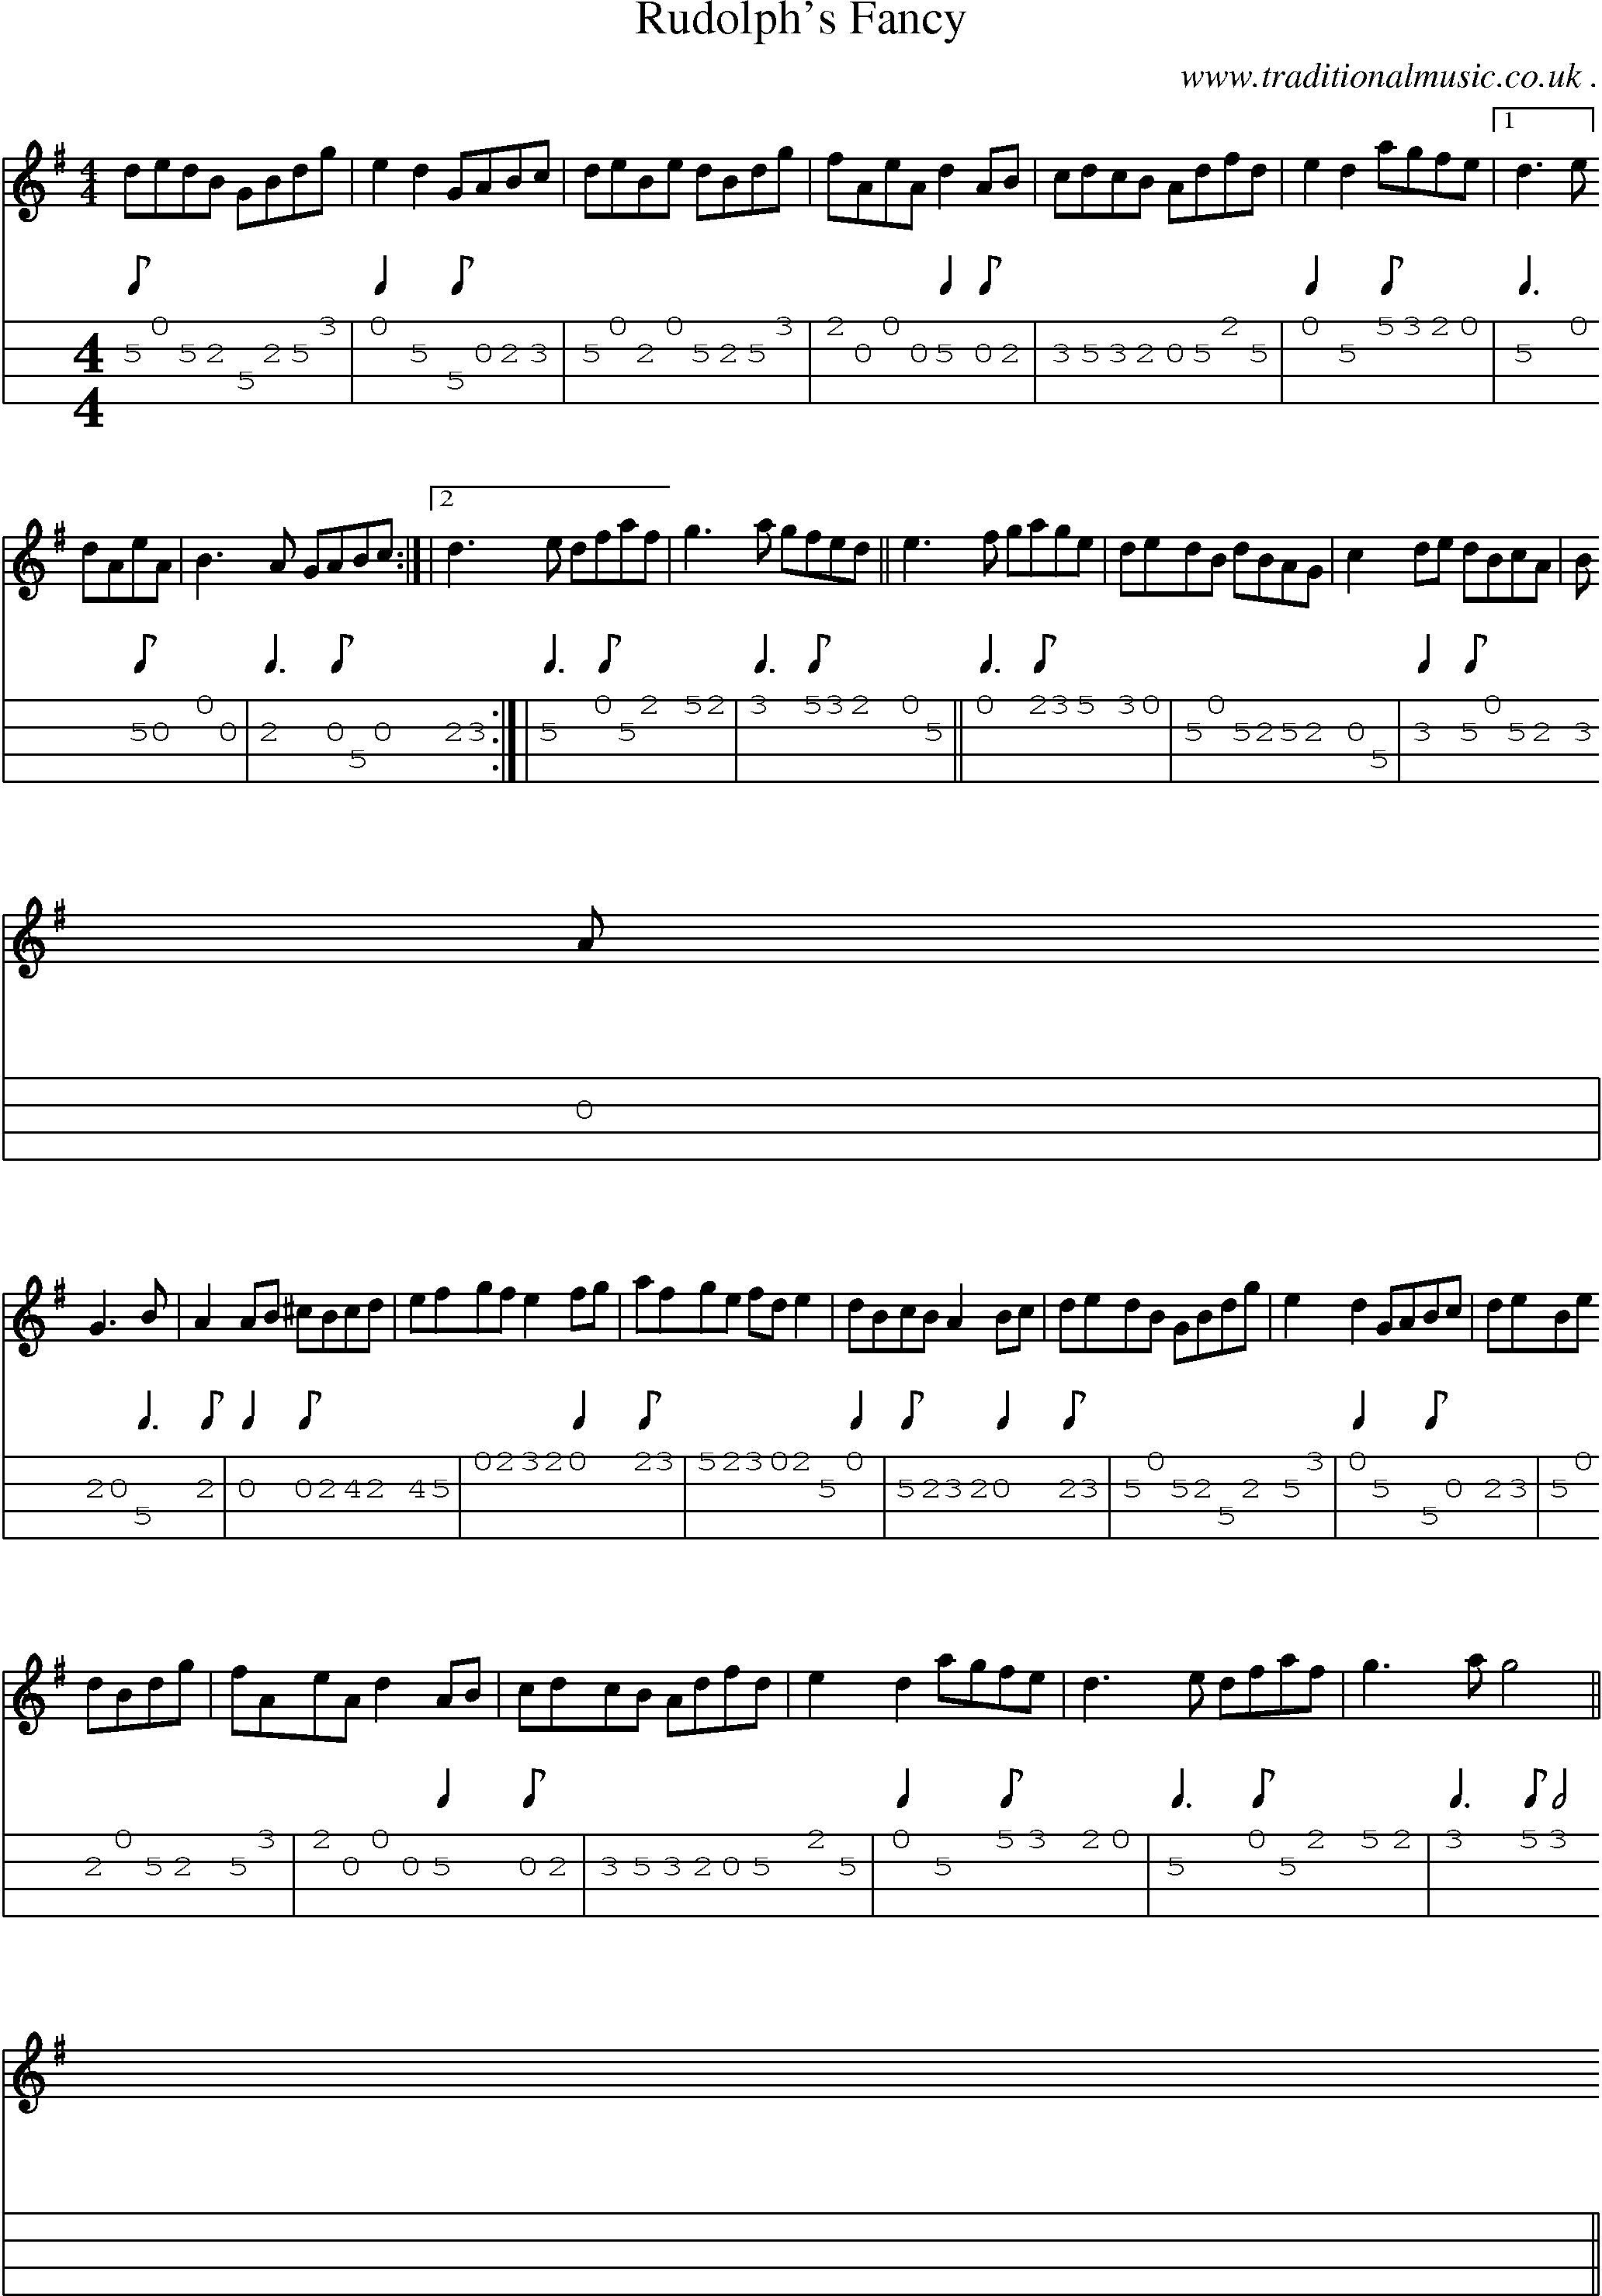 Sheet-Music and Mandolin Tabs for Rudolphs Fancy